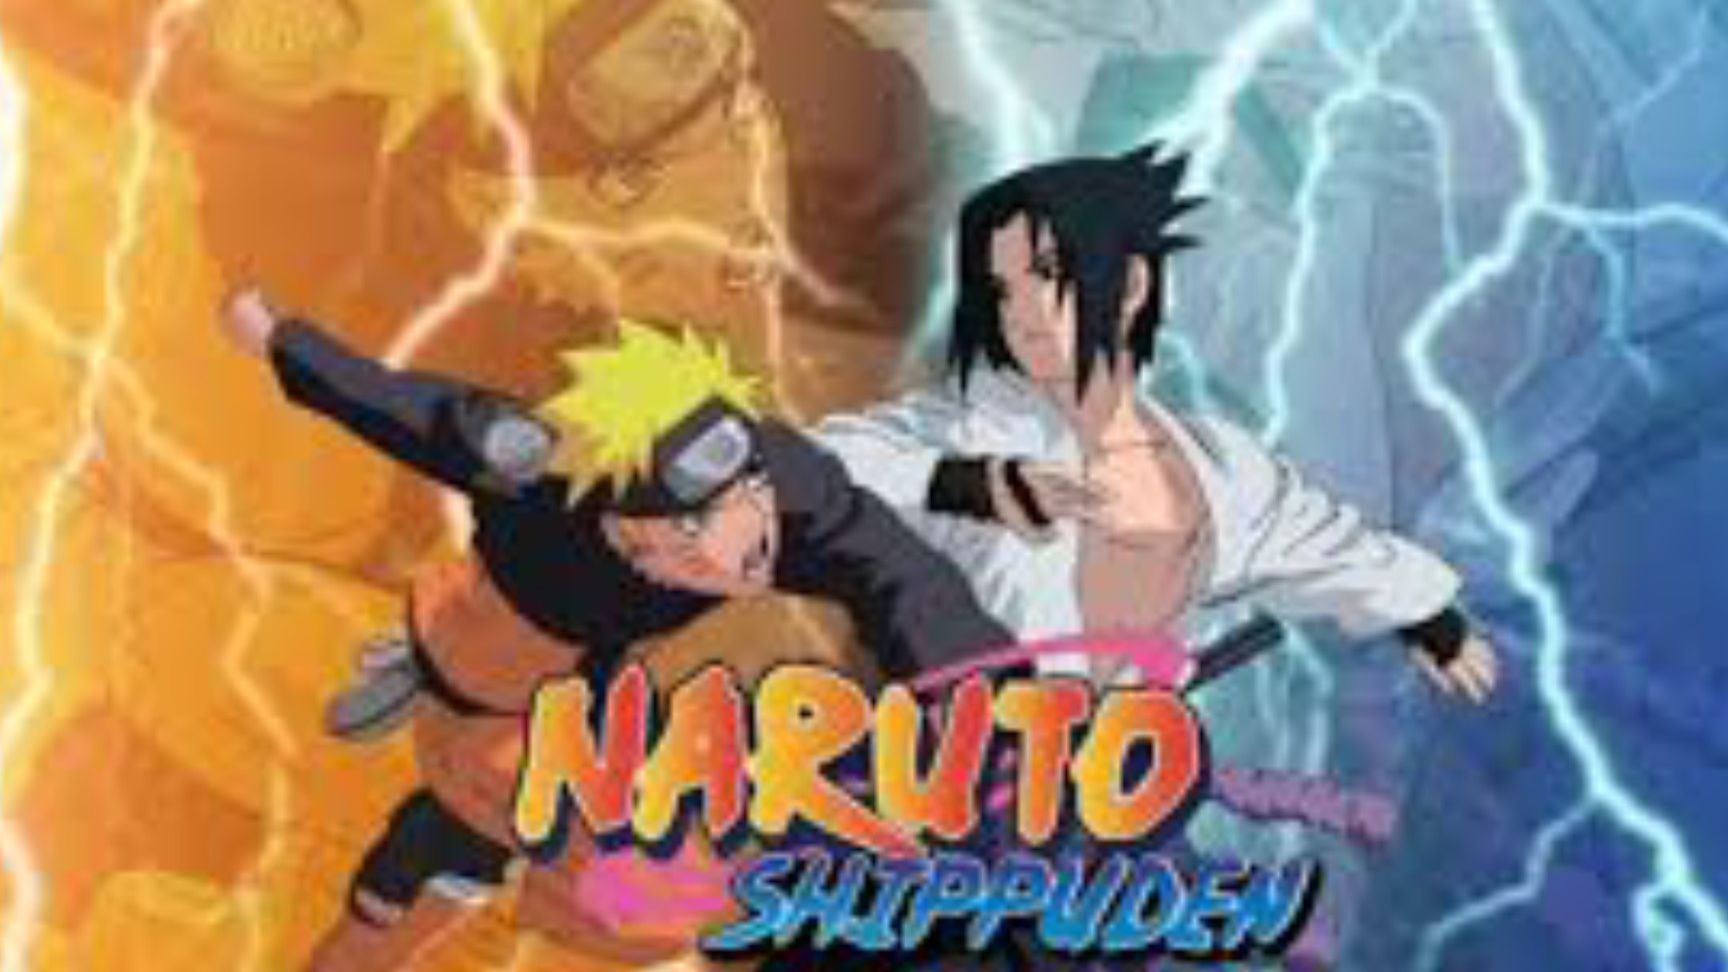 Before you ask, it is first shown in episode 487 of Naruto Shippuden